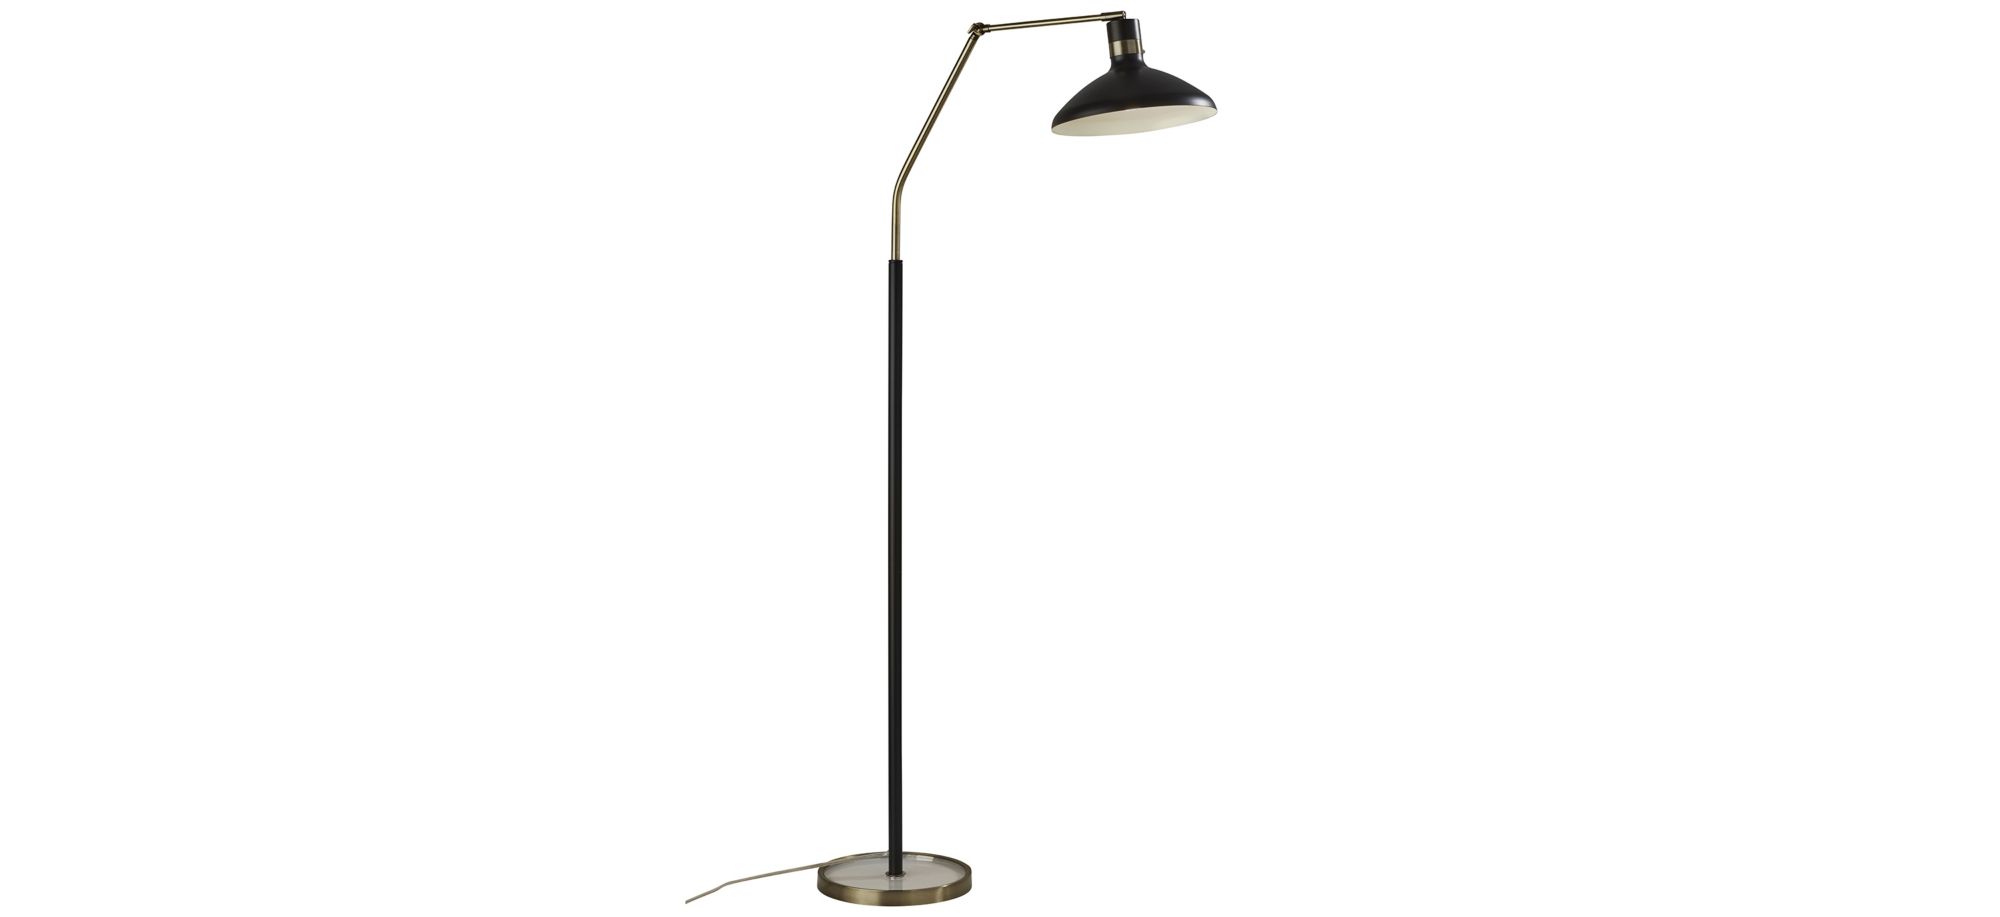 Bryson Floor Lamp in Black & Antique Brass by Adesso Inc